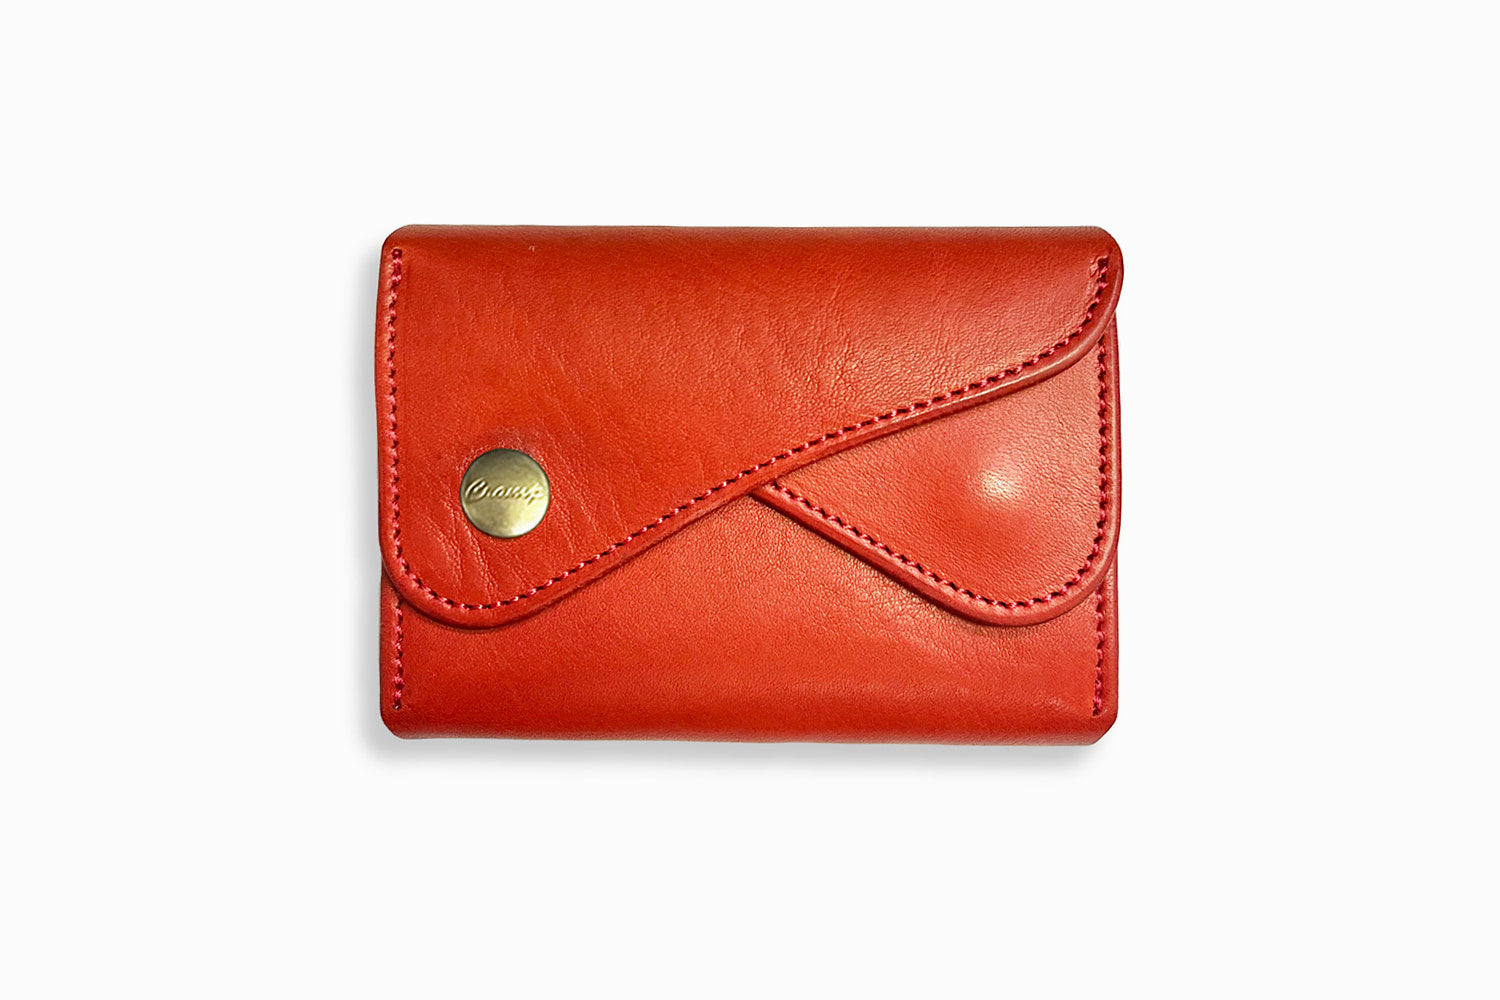 CRAMP / Ikenohata Ginzaten Italian shrink leather with a rich expression. Double flap card case with reliable capacity 